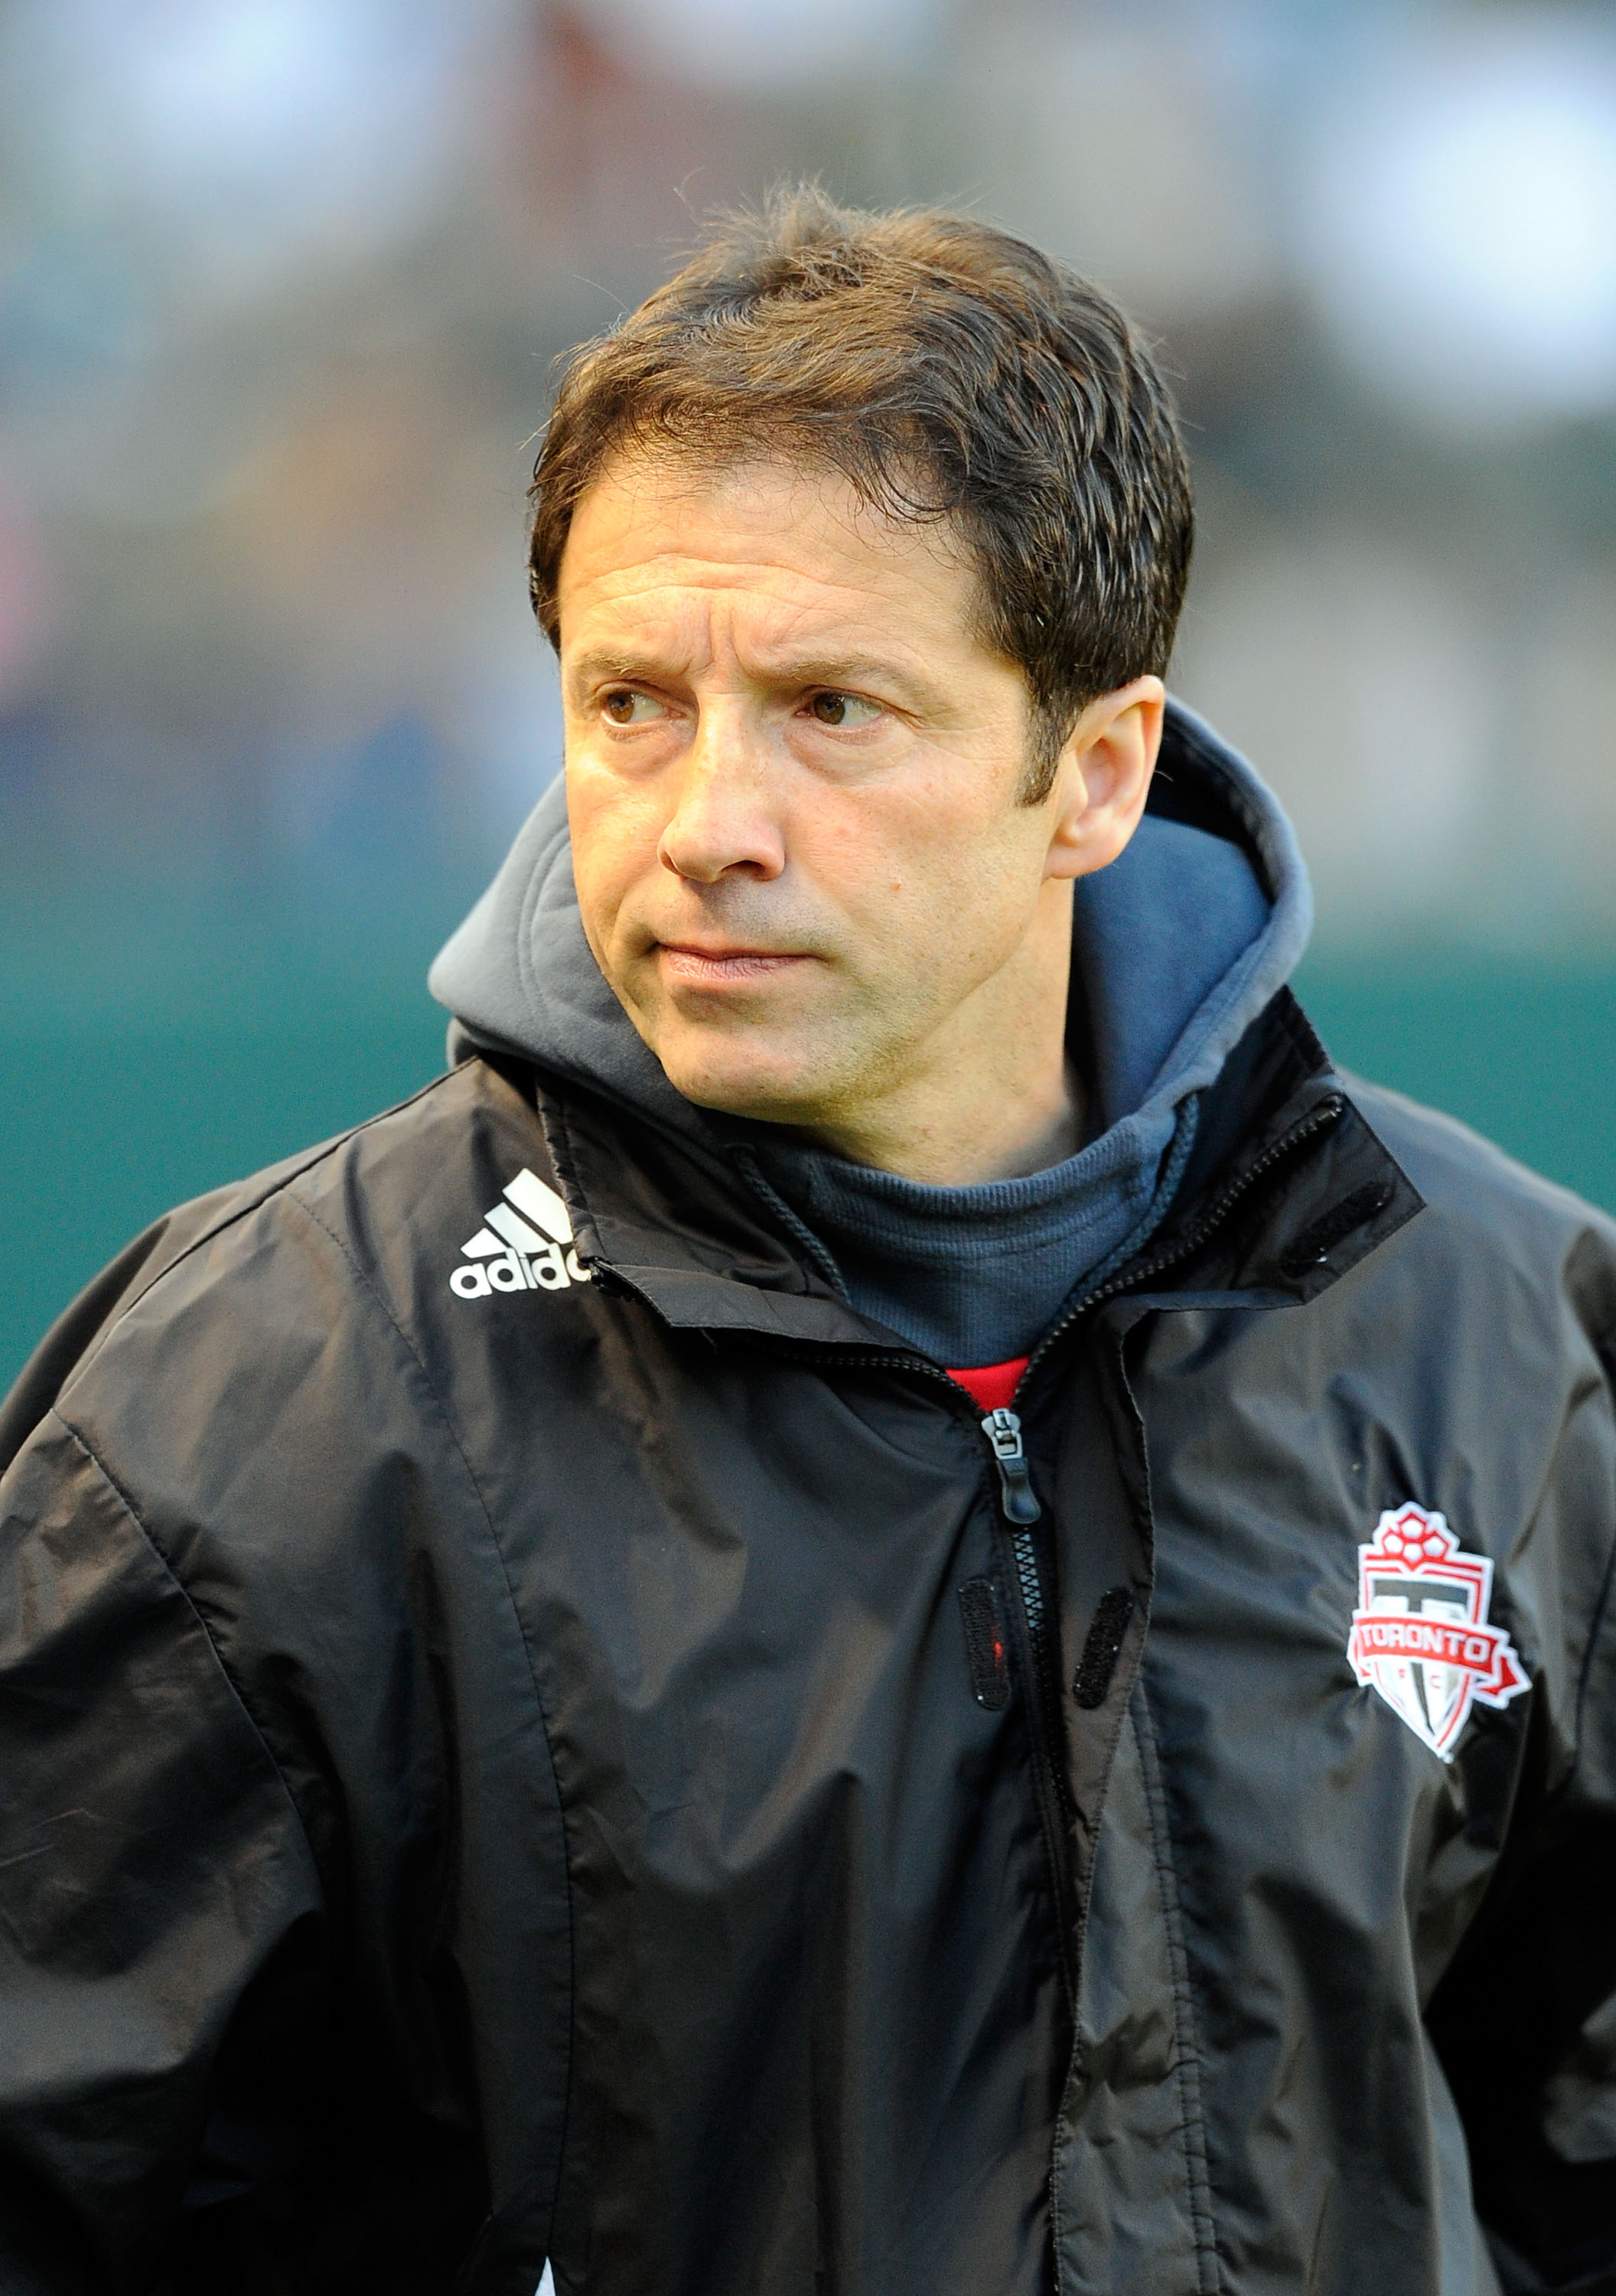 CARSON, CA - MAY 15:  Preki coach of Toronto FC during the MLS soccer match against Los Angeles Galaxy on May 15, 2010 at the Home Depot Center in Carson, California.  (Photo by Kevork Djansezian/Getty Images)